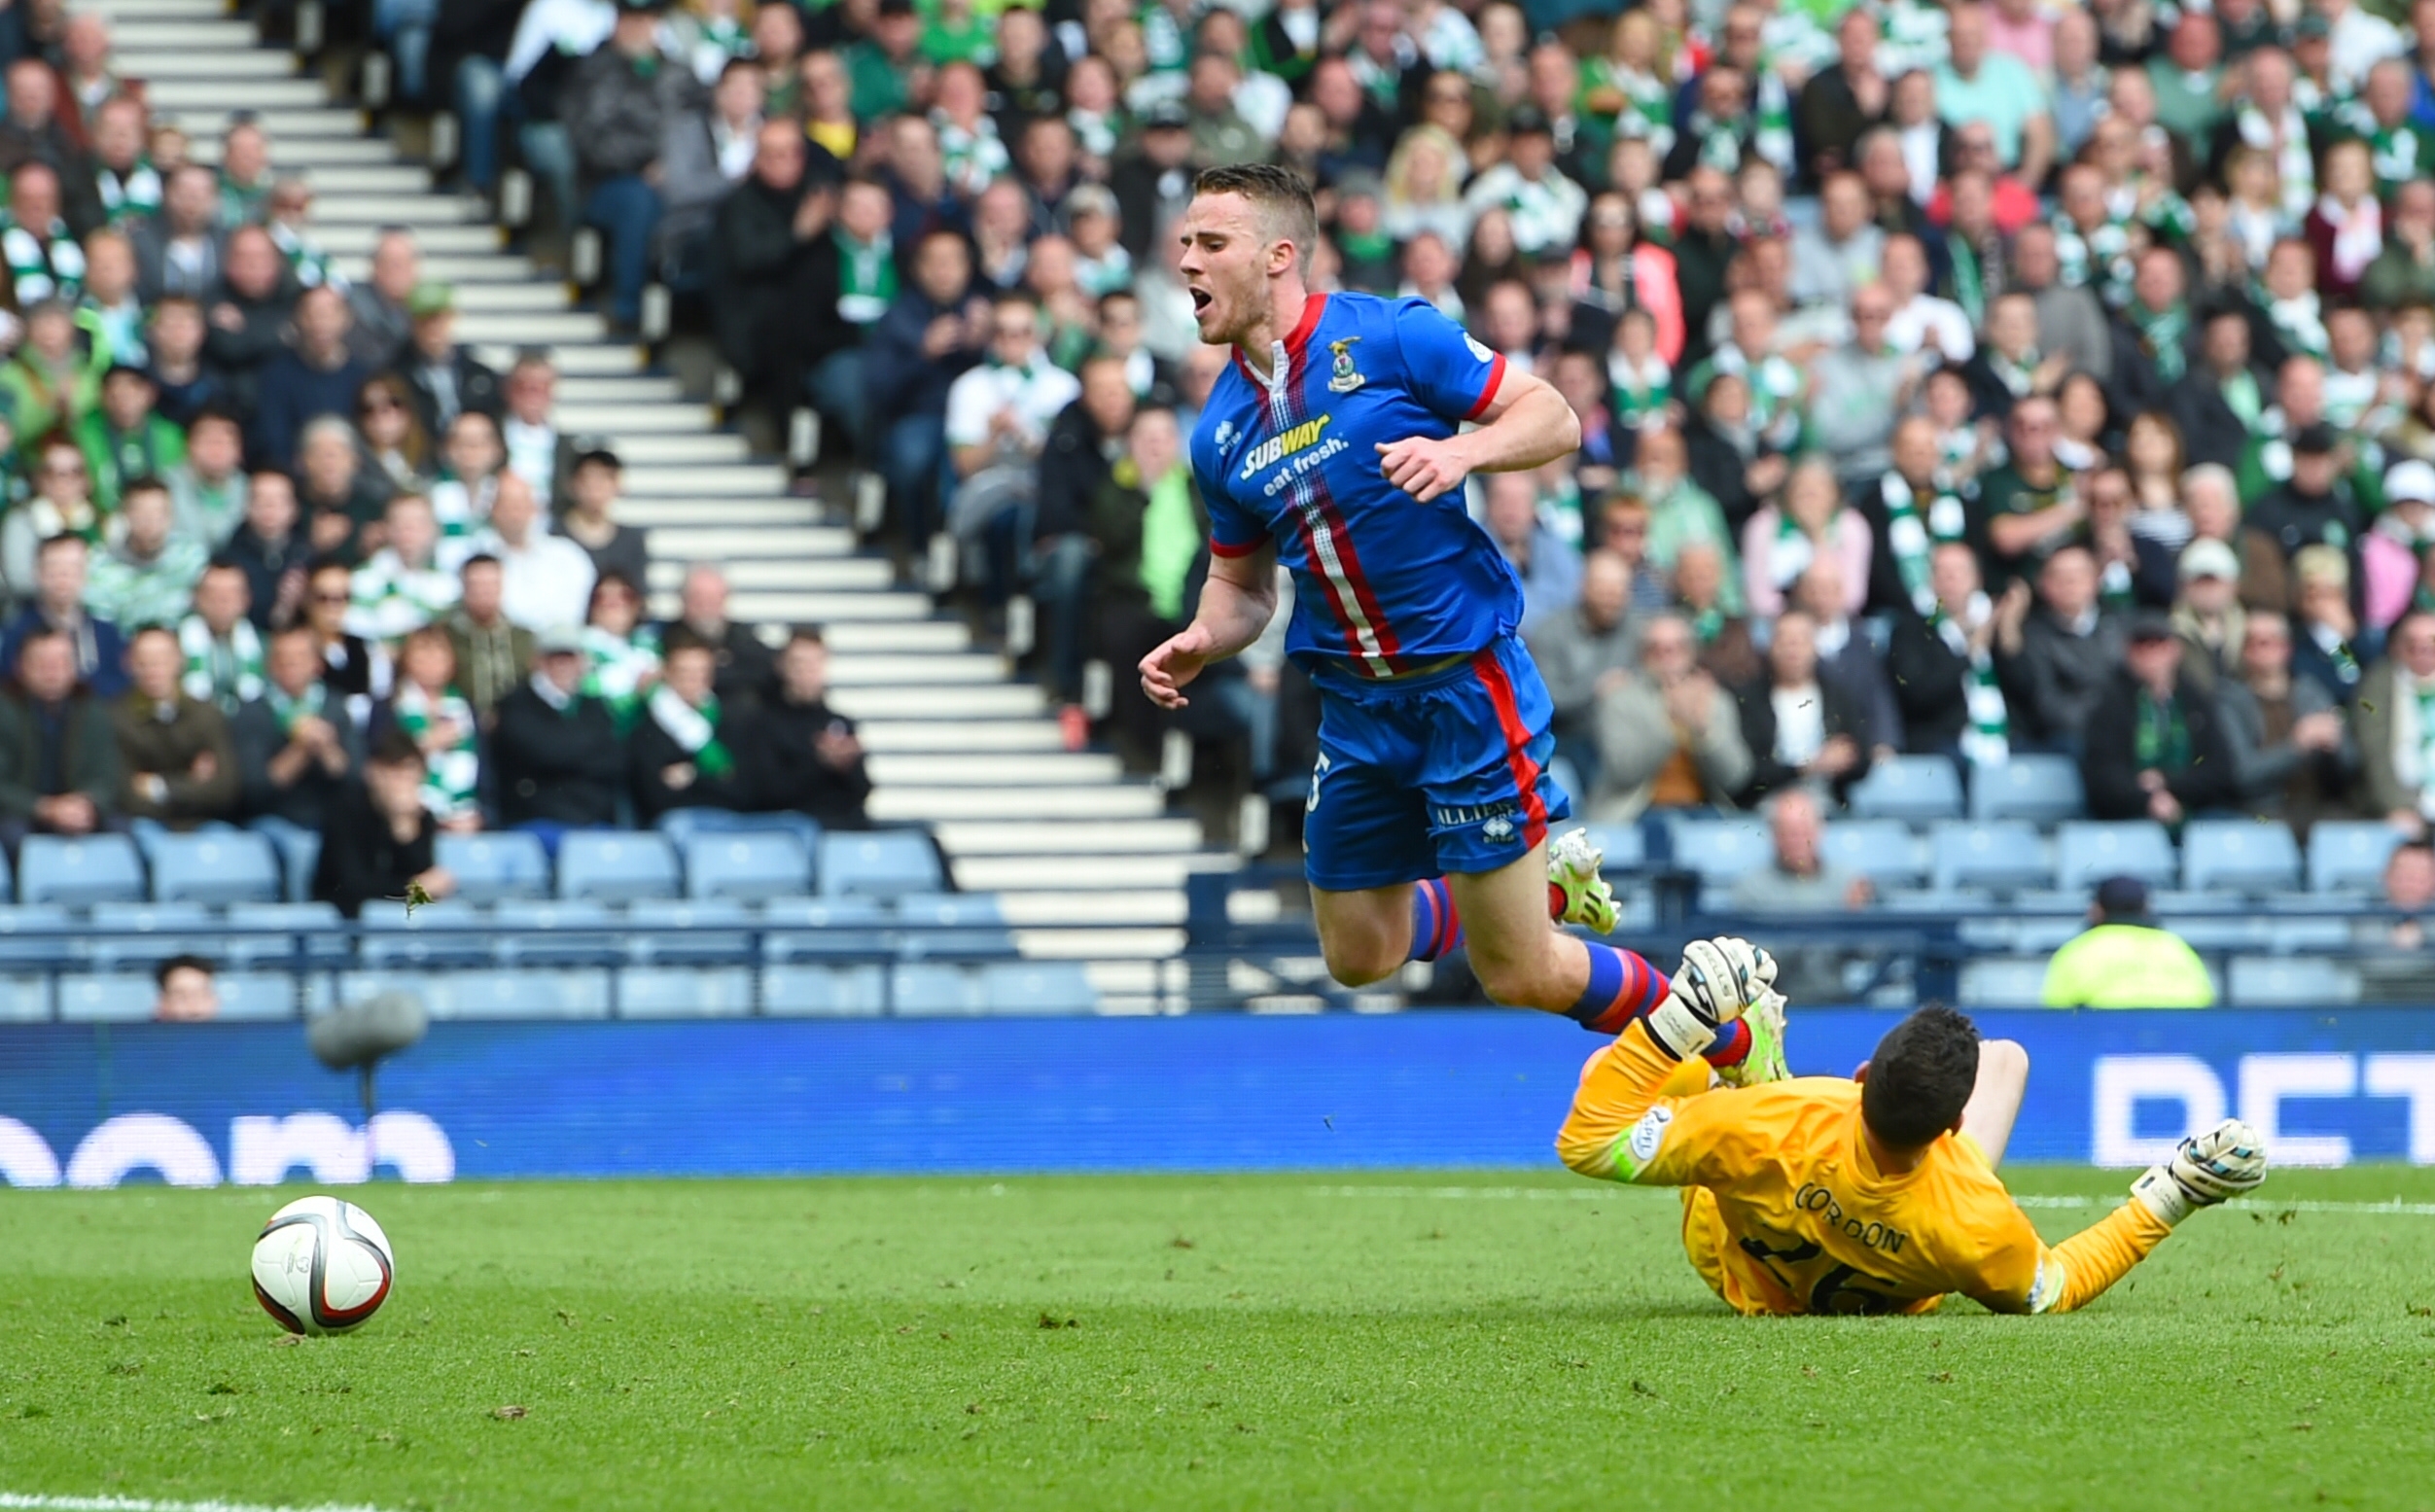 The moment that changed the shape of the game as Craig Gordon brings down Marley Watkins